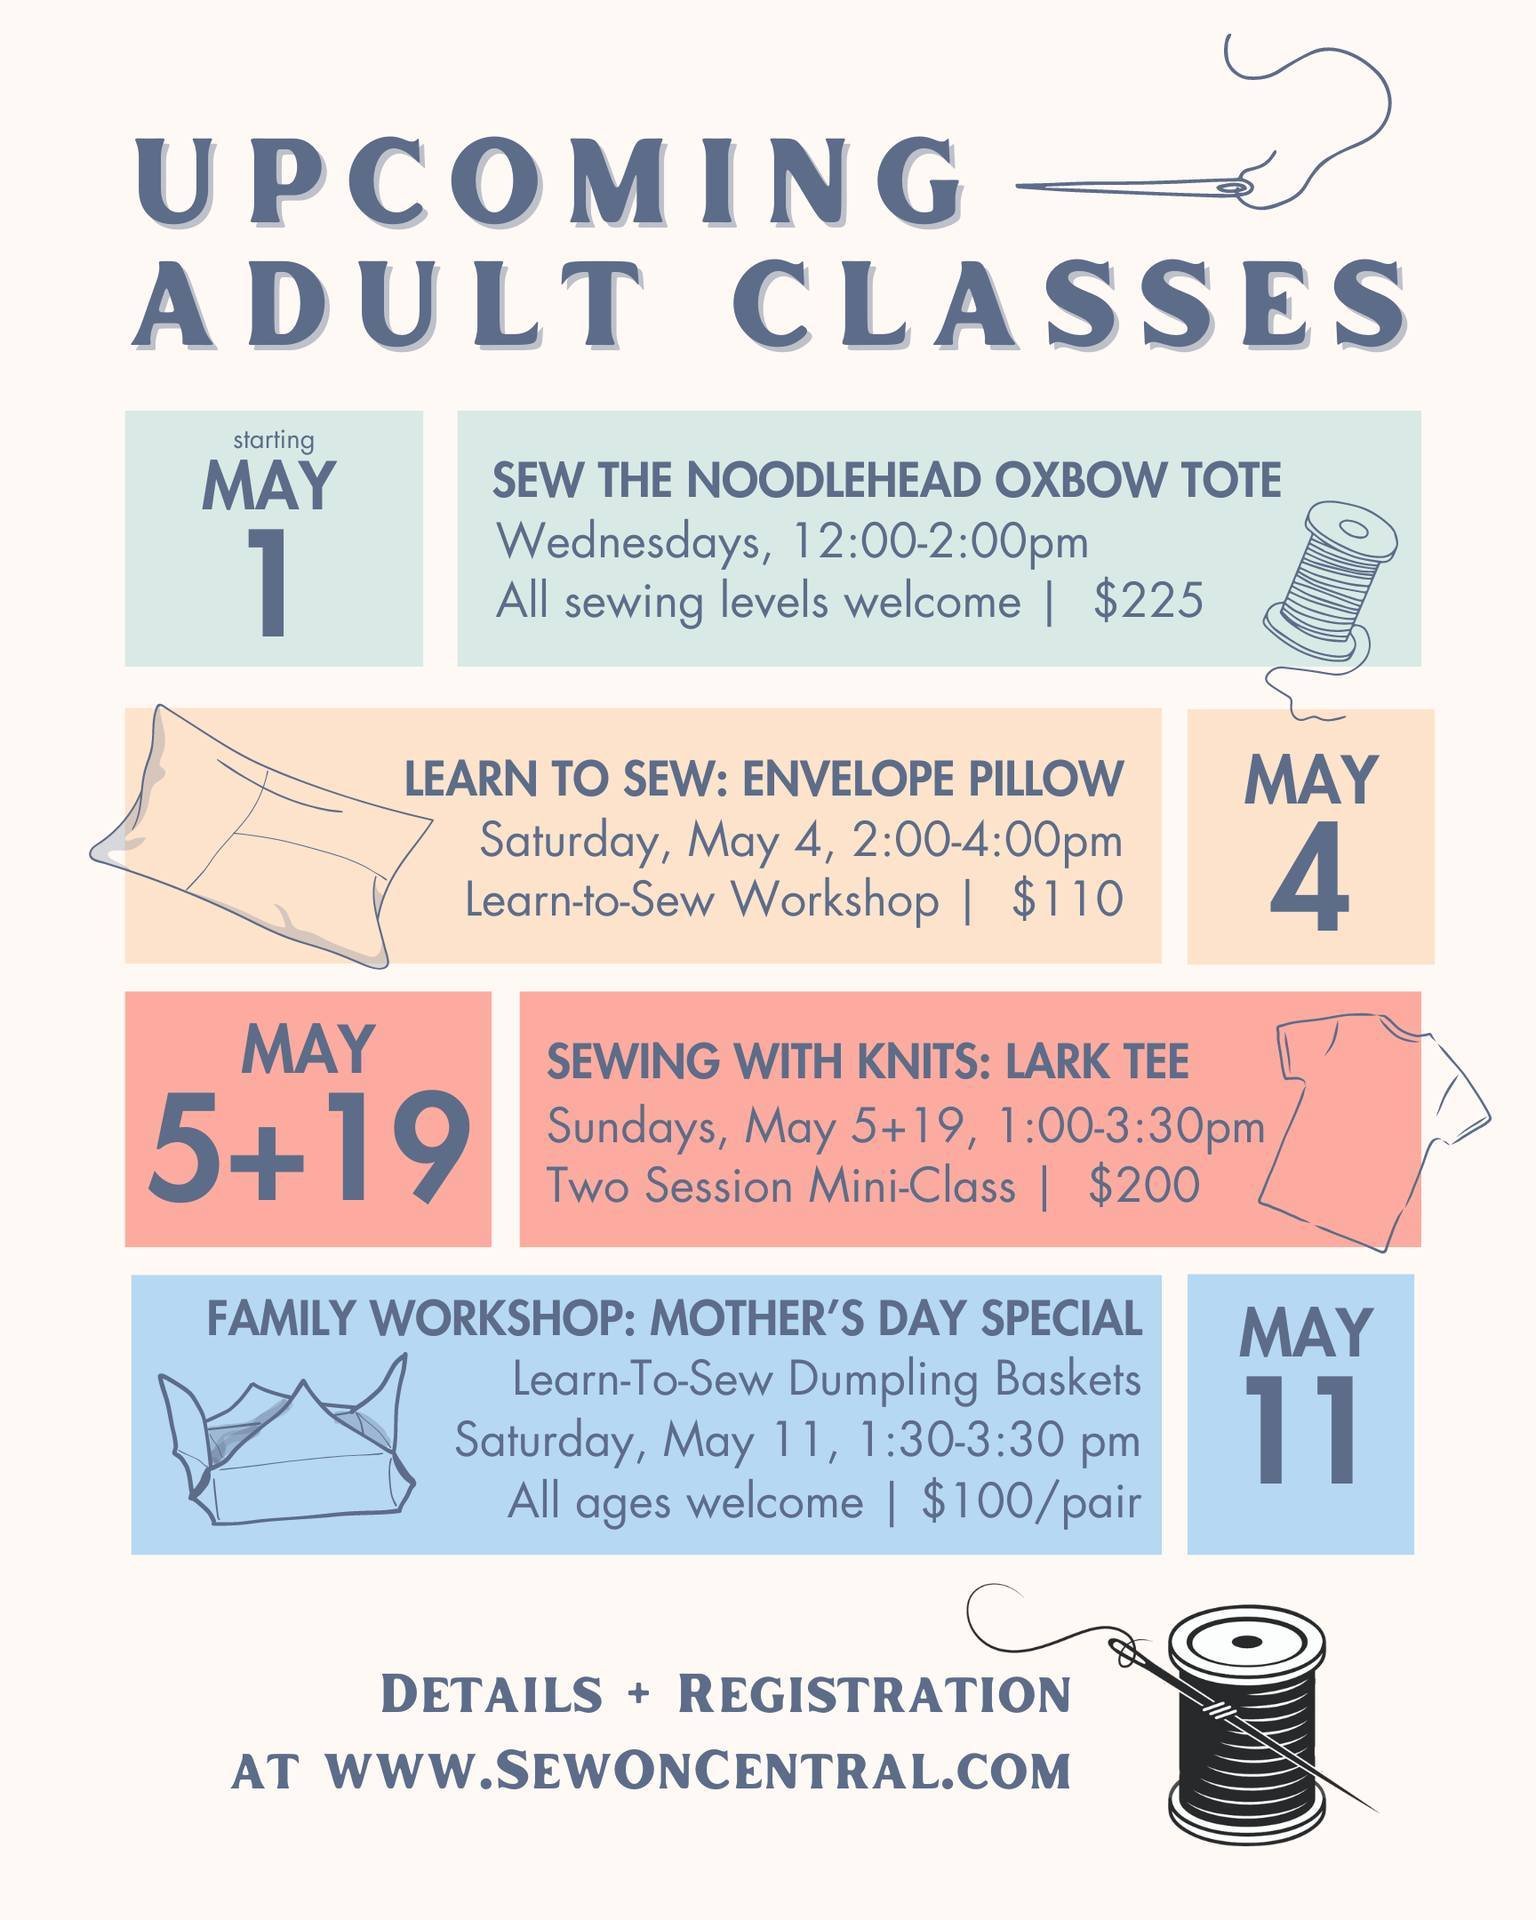 More Adult Classes coming up soon for May! From absolute beginners to advanced sewers, apparel, bags, and more, we have something for everyone! We're adding more Adult Classes to our schedule soon too, what would you like to learn? Let us know below!